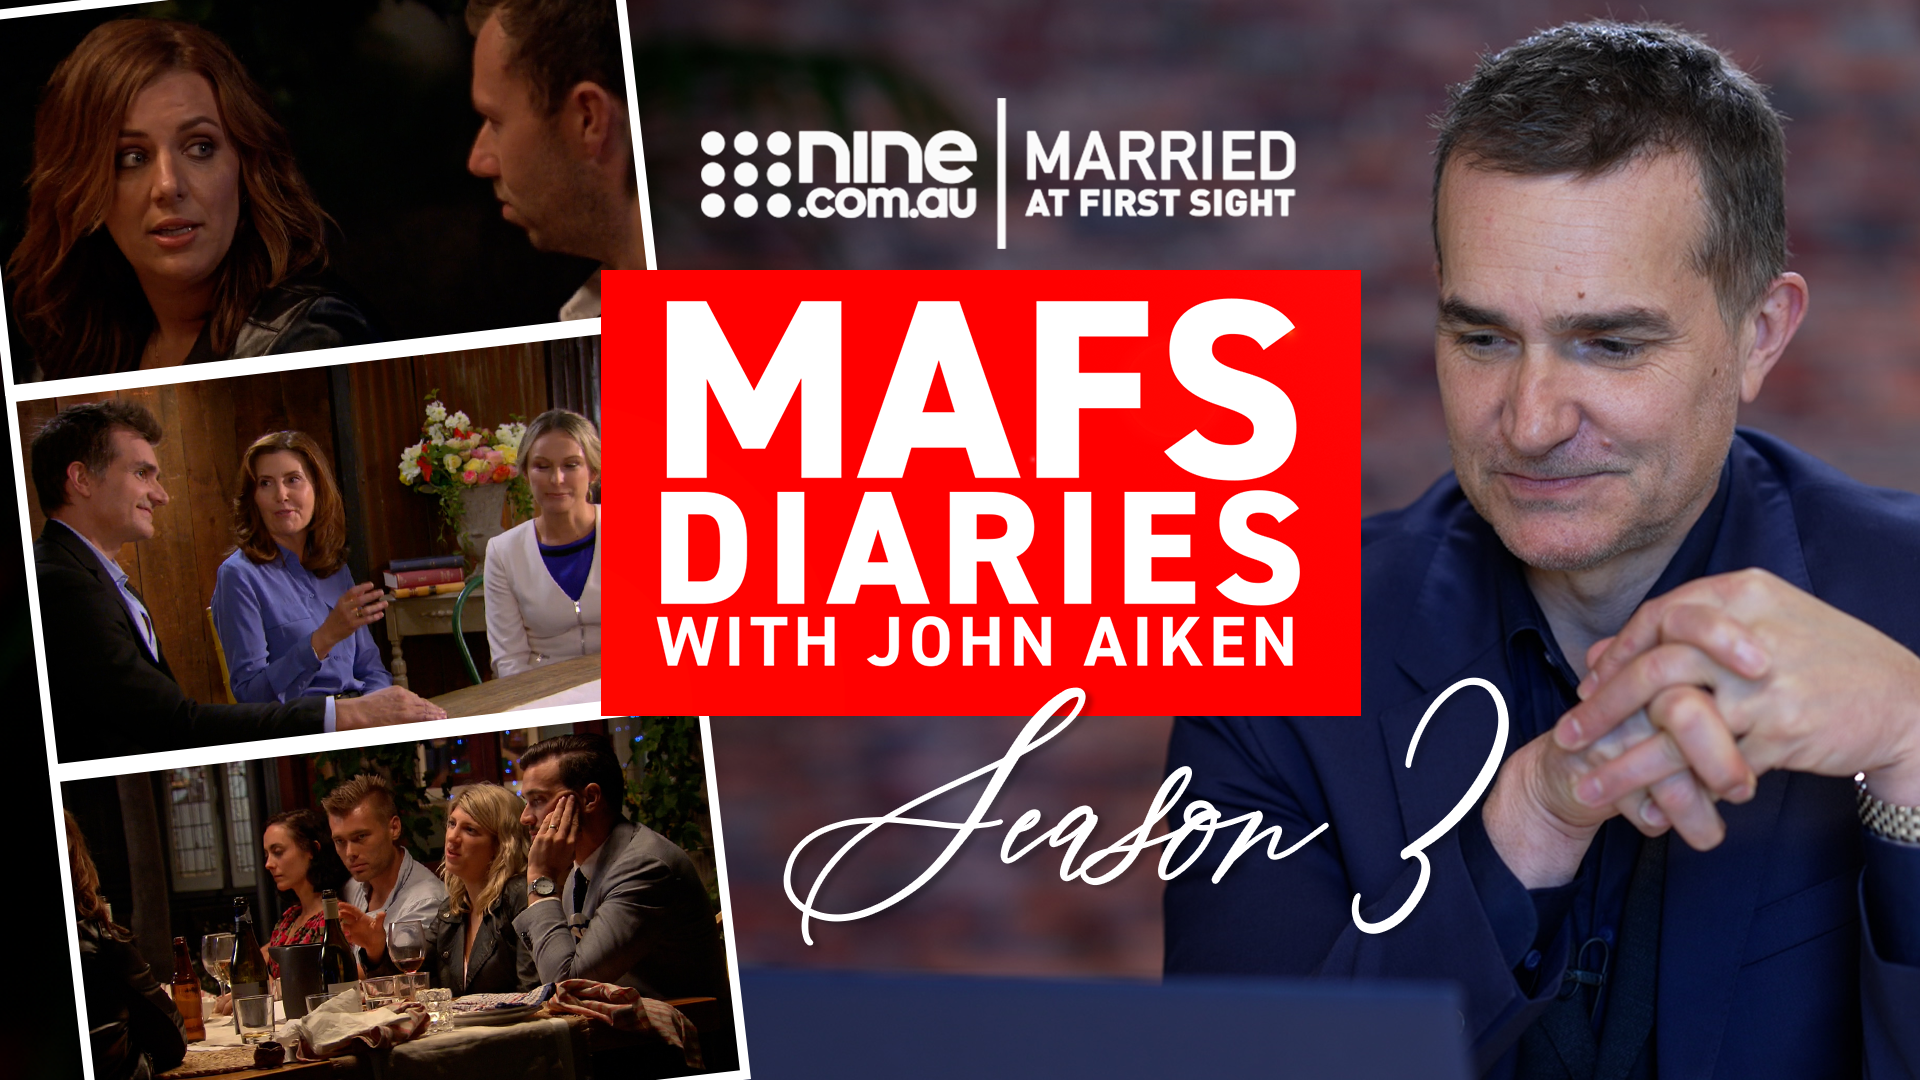 The MAFS Diaries with John Aiken Episode 3: Expert looks back on history-making moment